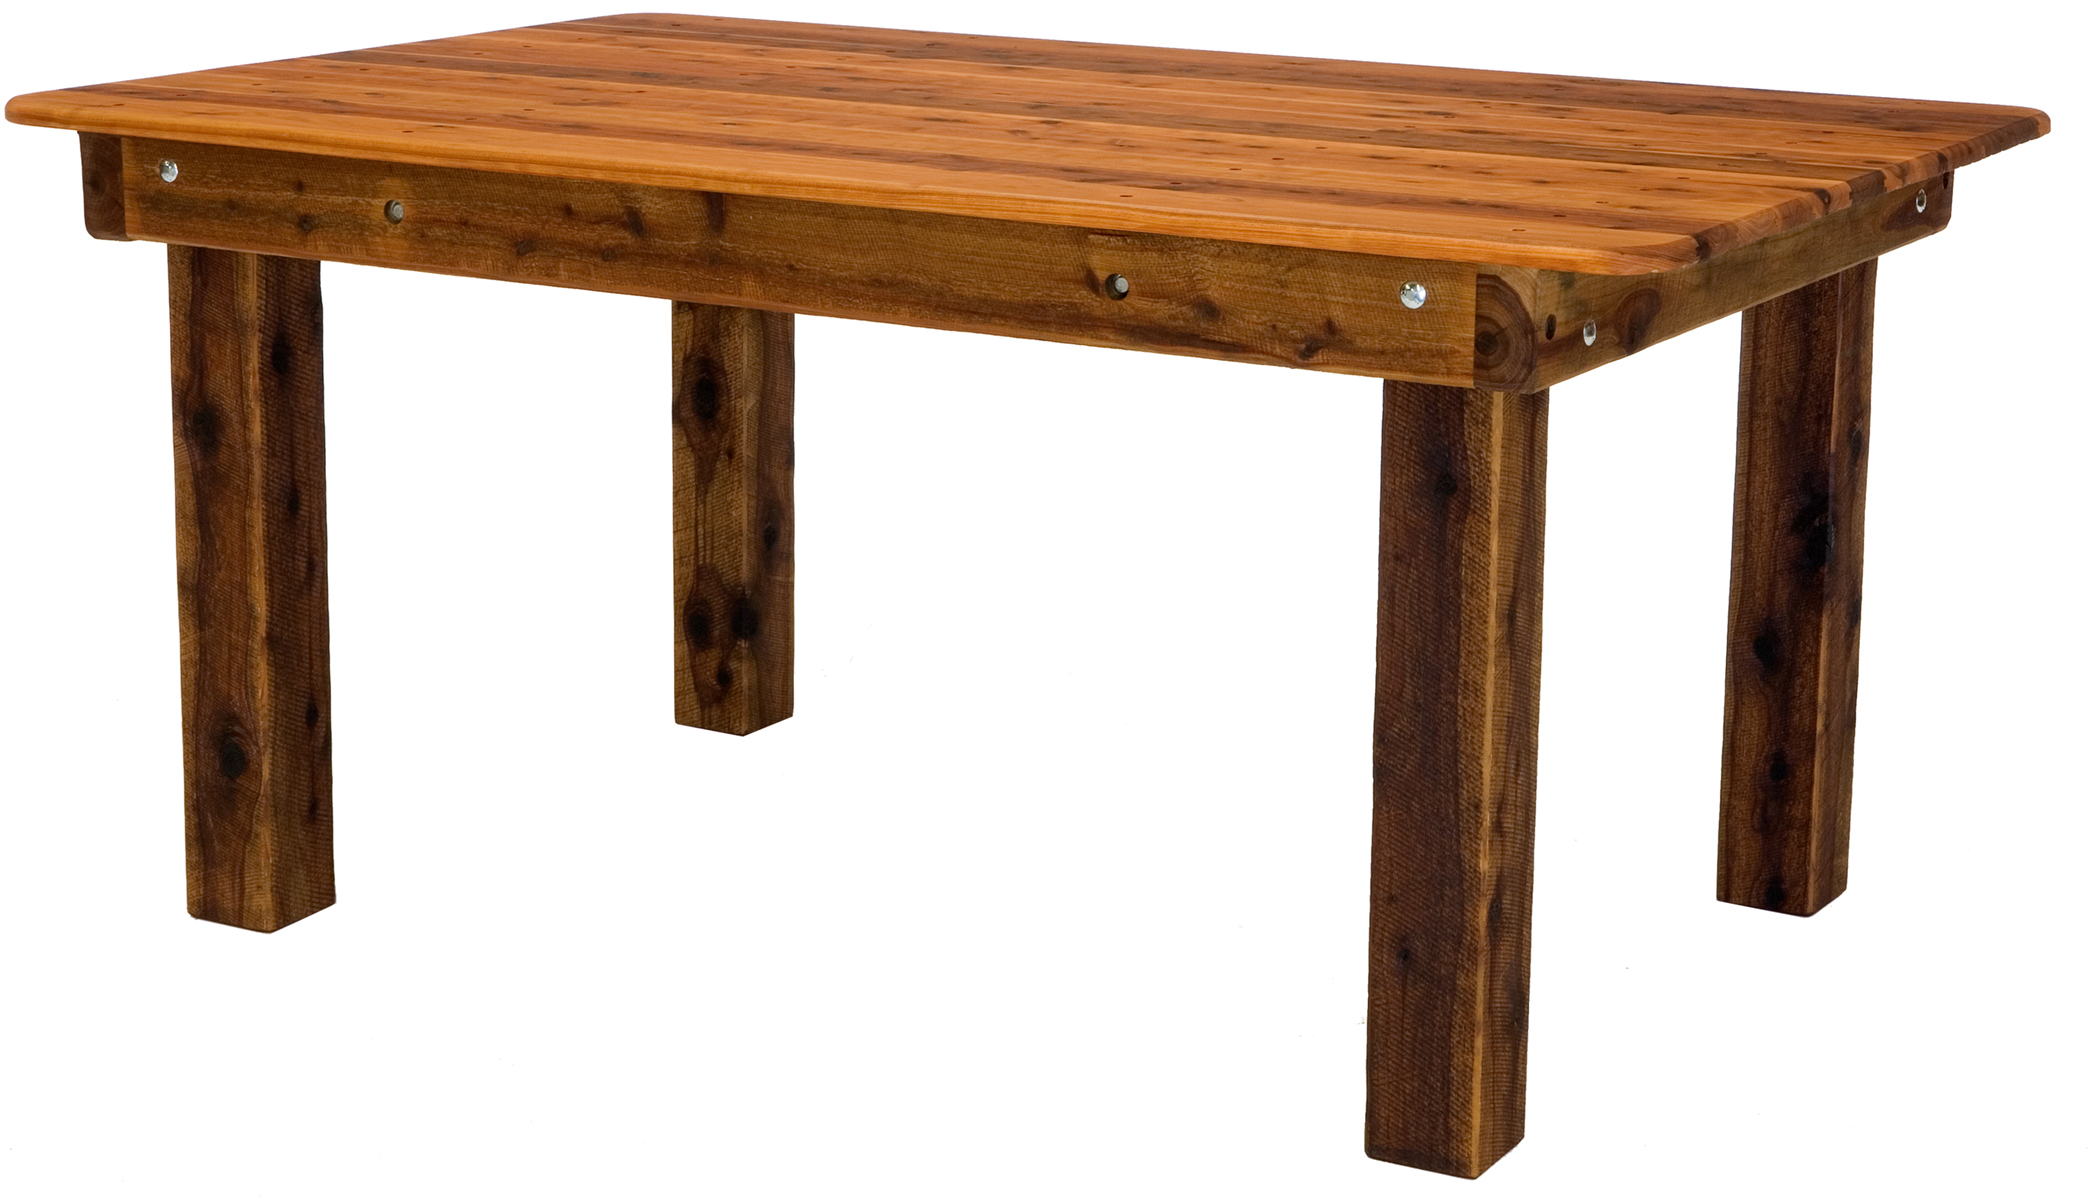 Rectangular Palm Beach Cypress Outdoor Timber Table square legs available to order now